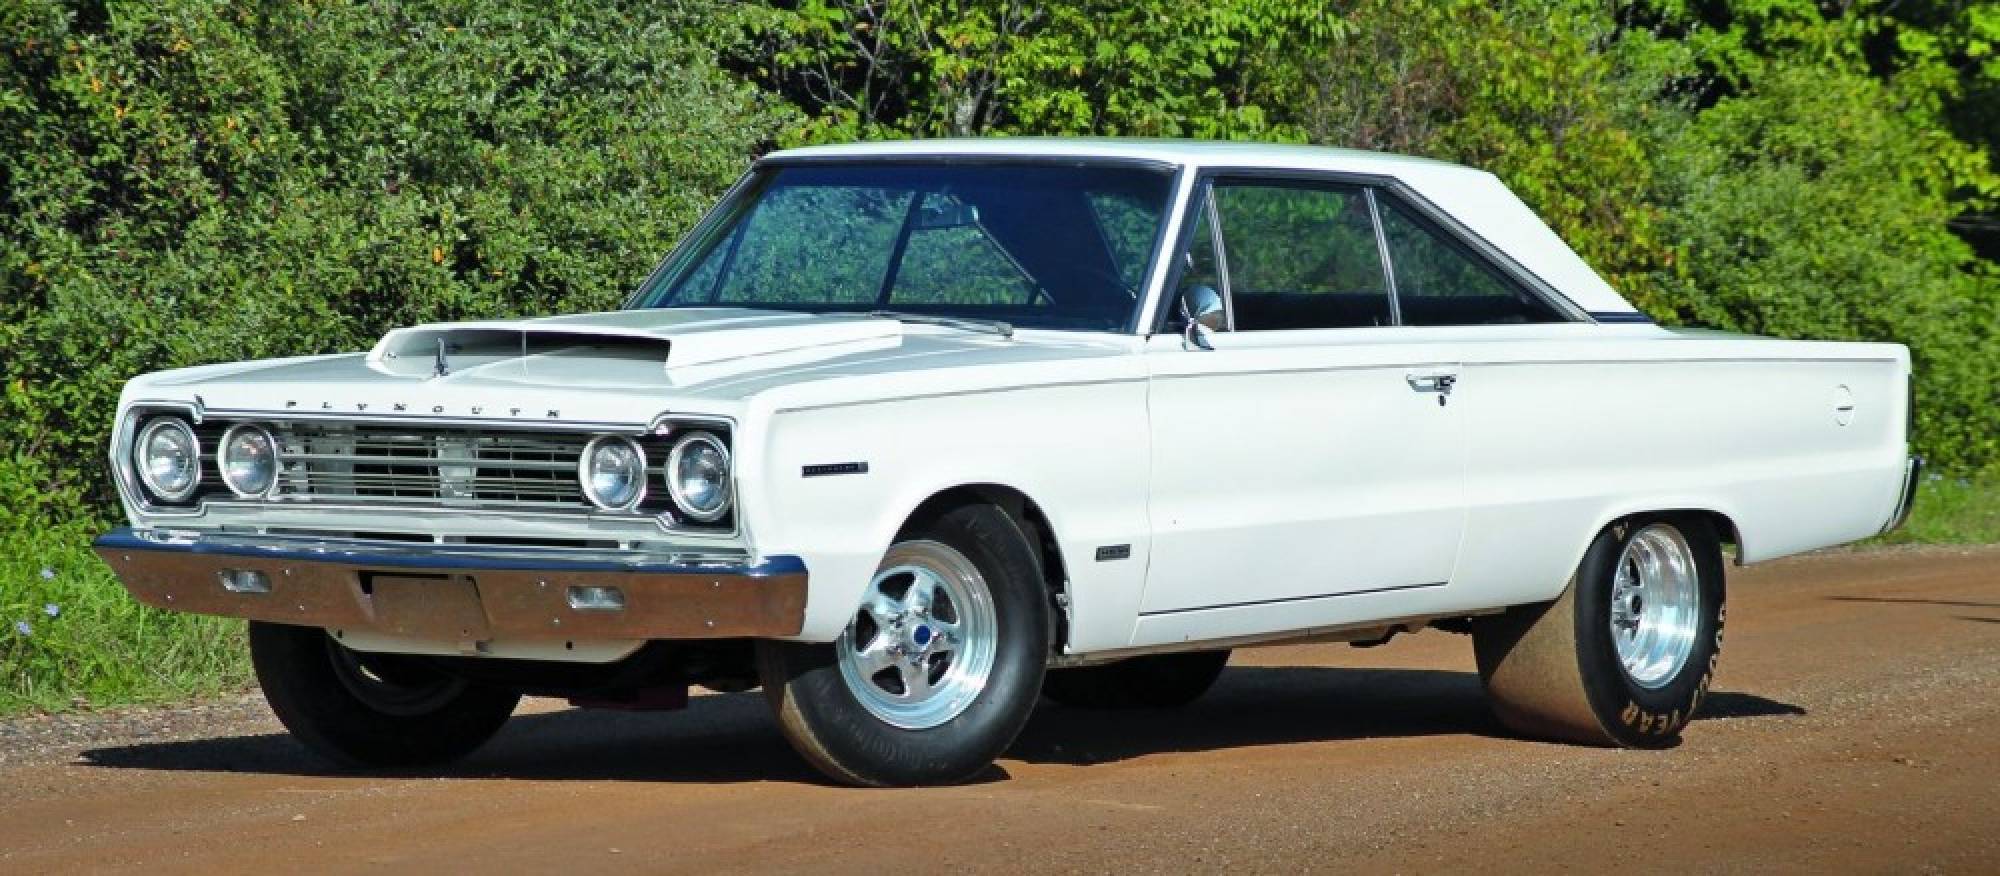 1967 Plymouth Belvedere Backgrounds on Wallpapers Vista